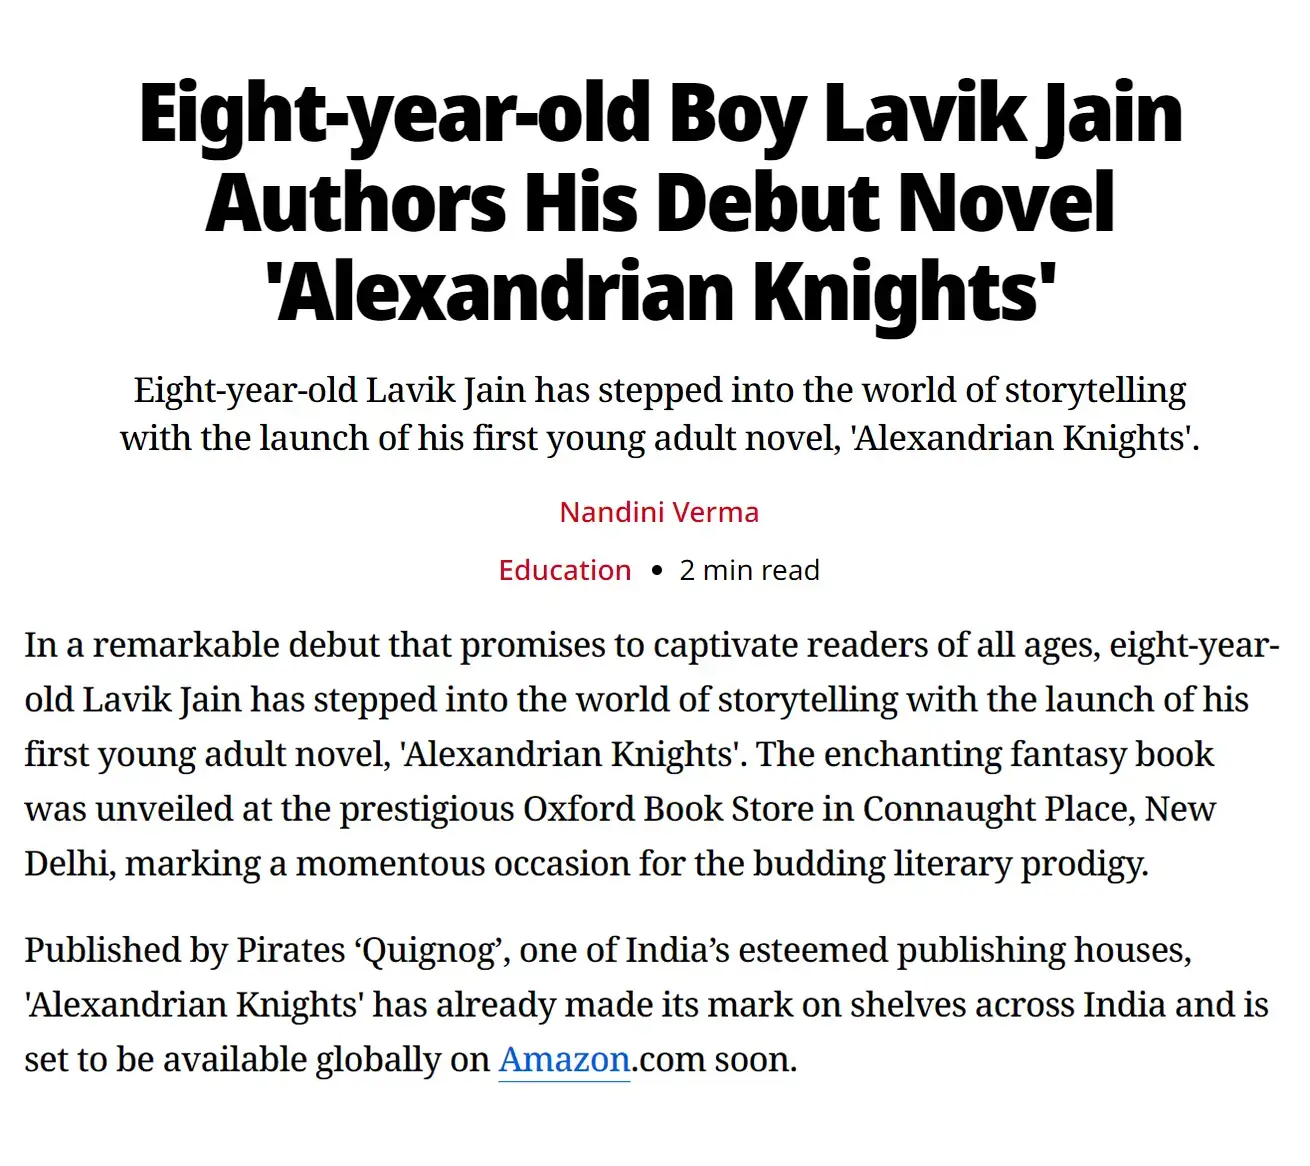 Eight-year-old Lavik Jain authors his debut book ‘Alexandrian Knights’ (1)